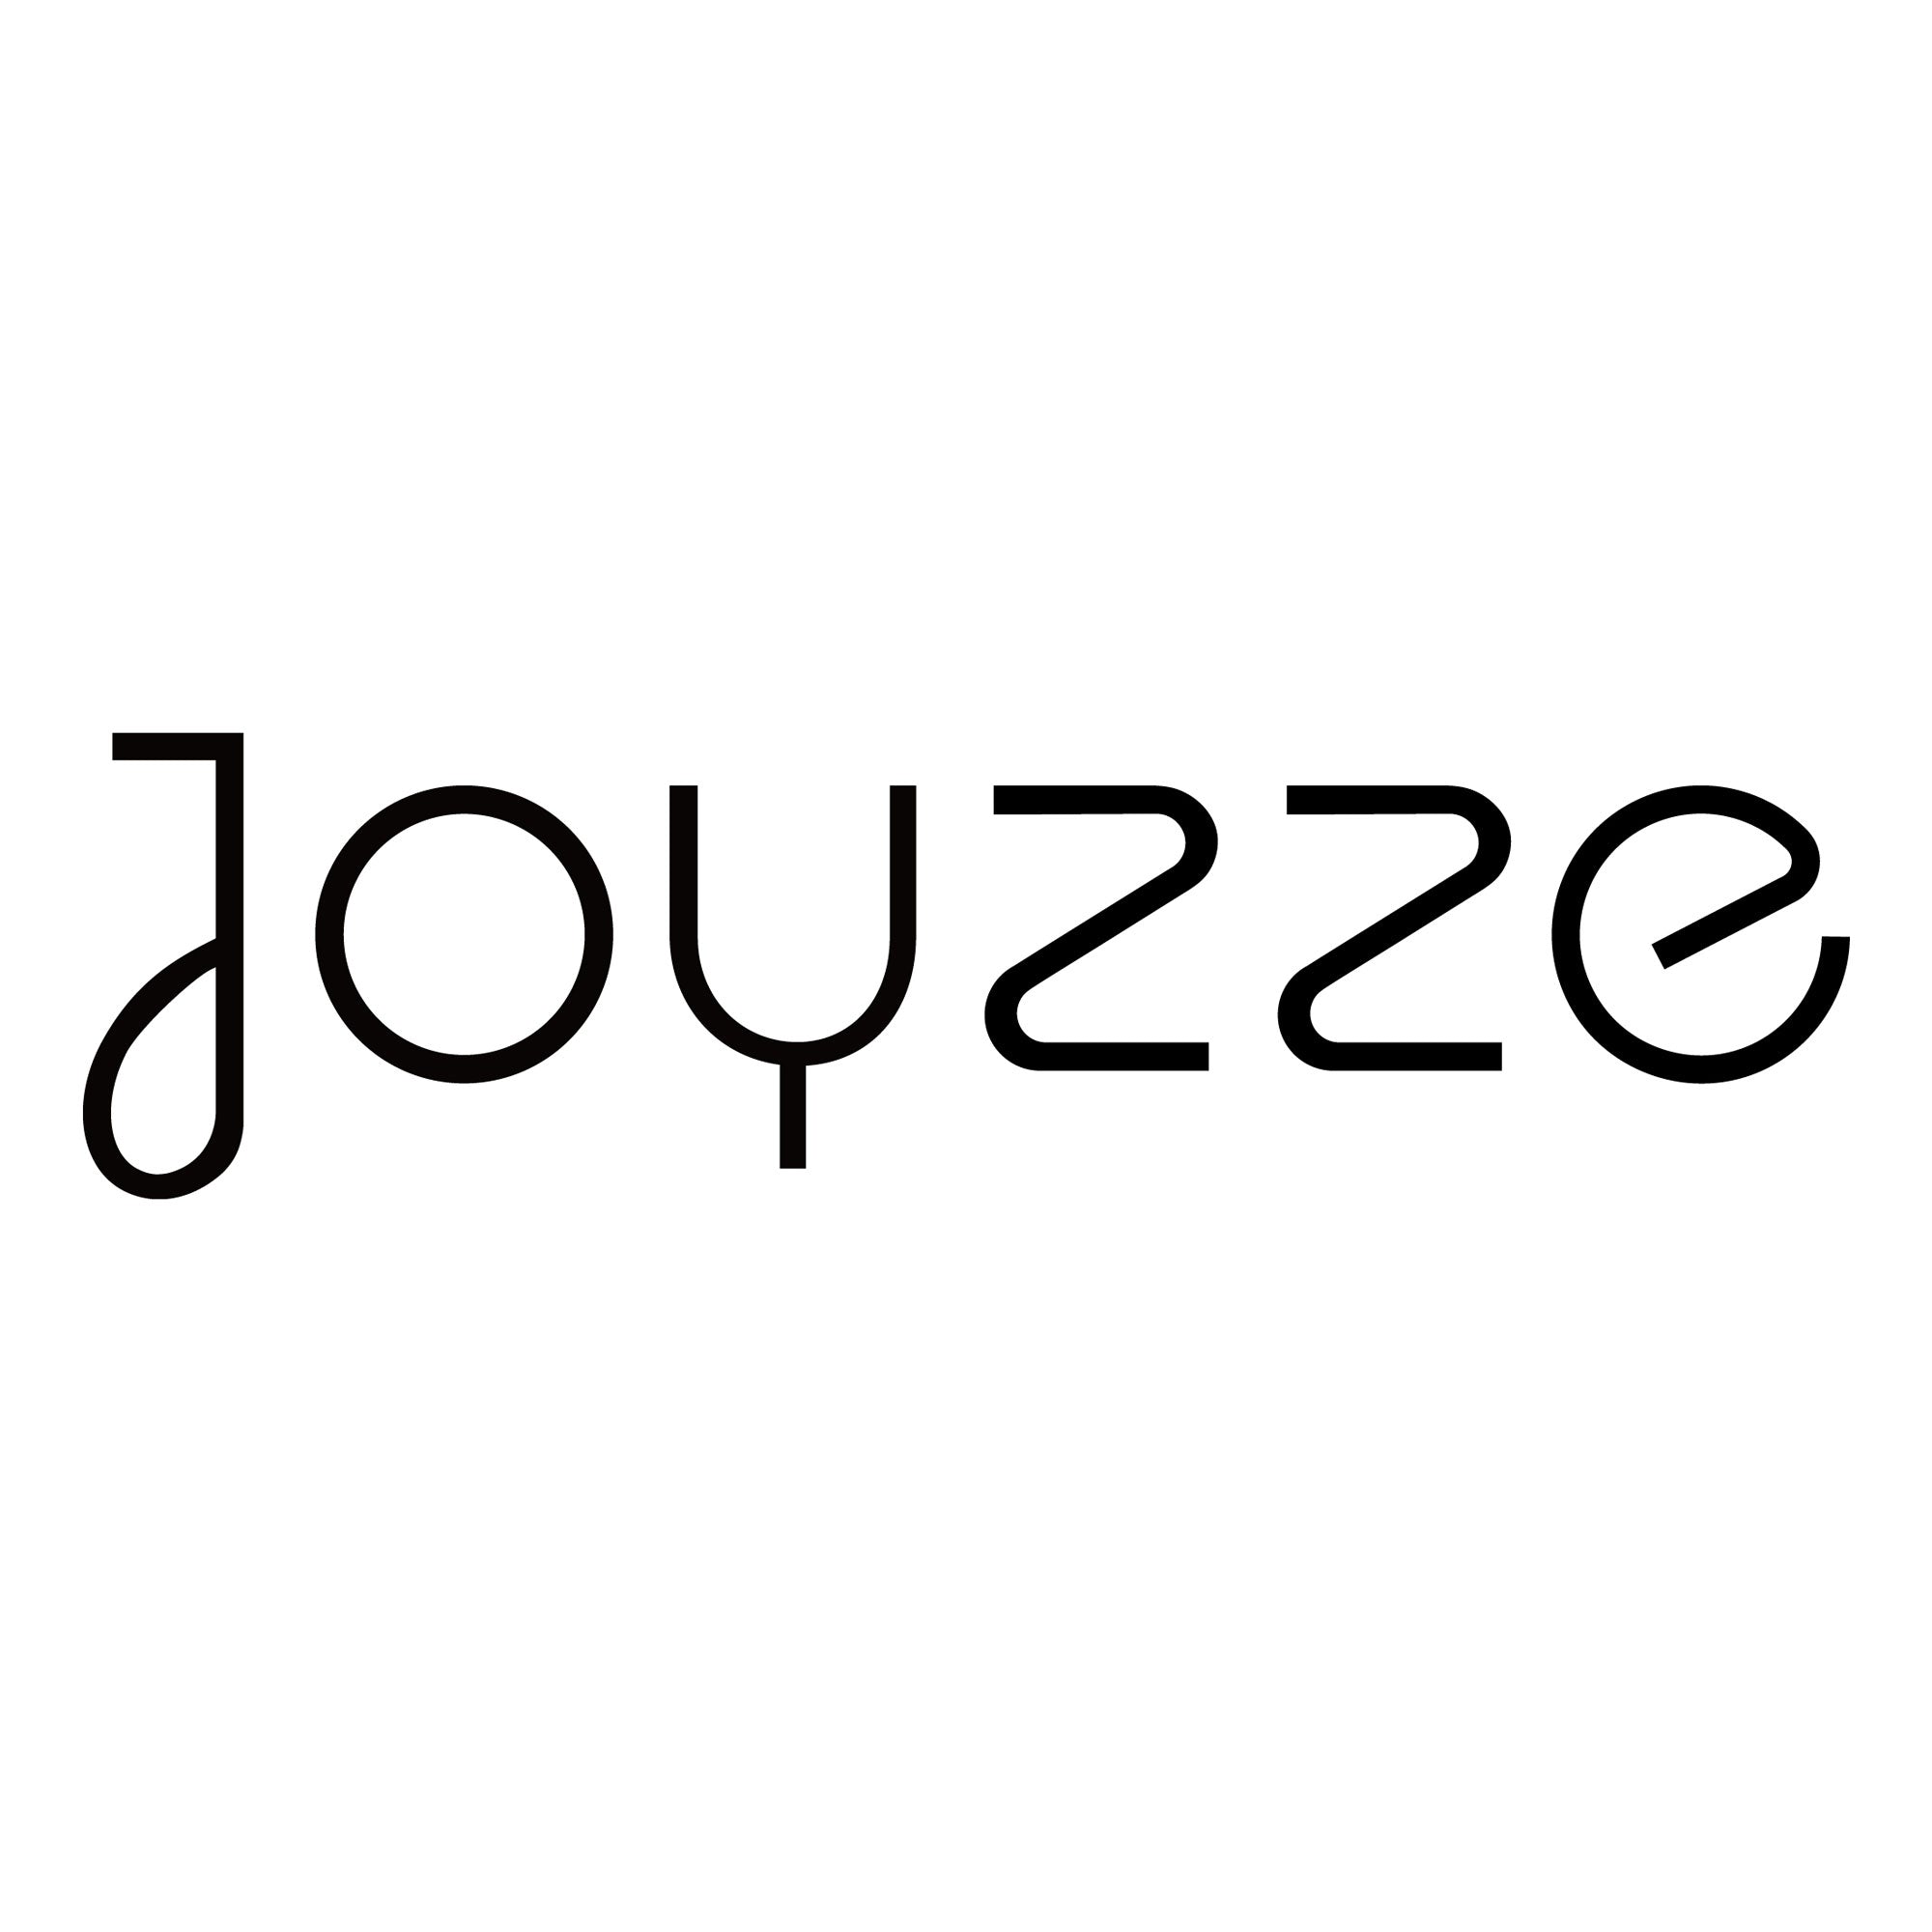 joyzze clippers blades combs and dog grooming accessories brand logo